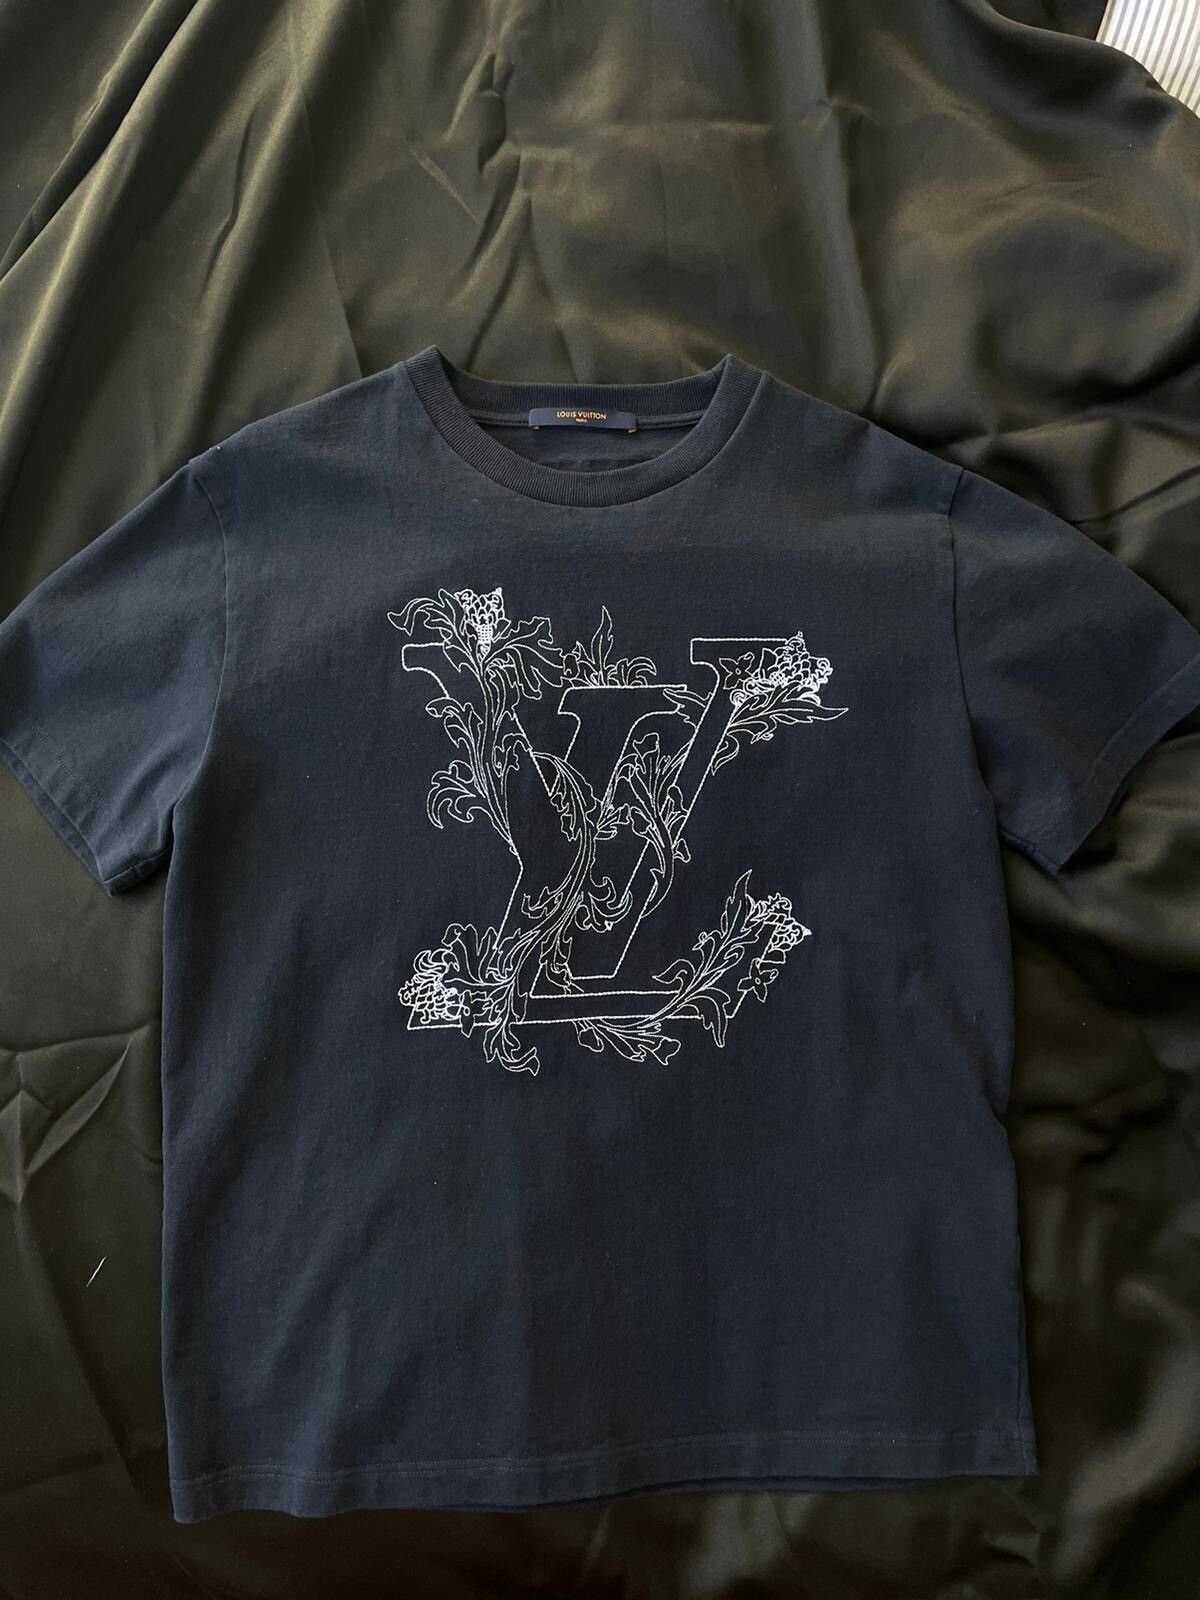 Compare prices for LV Vegetal Lace Embroidery T-Shirt (1A7QFO) in official  stores